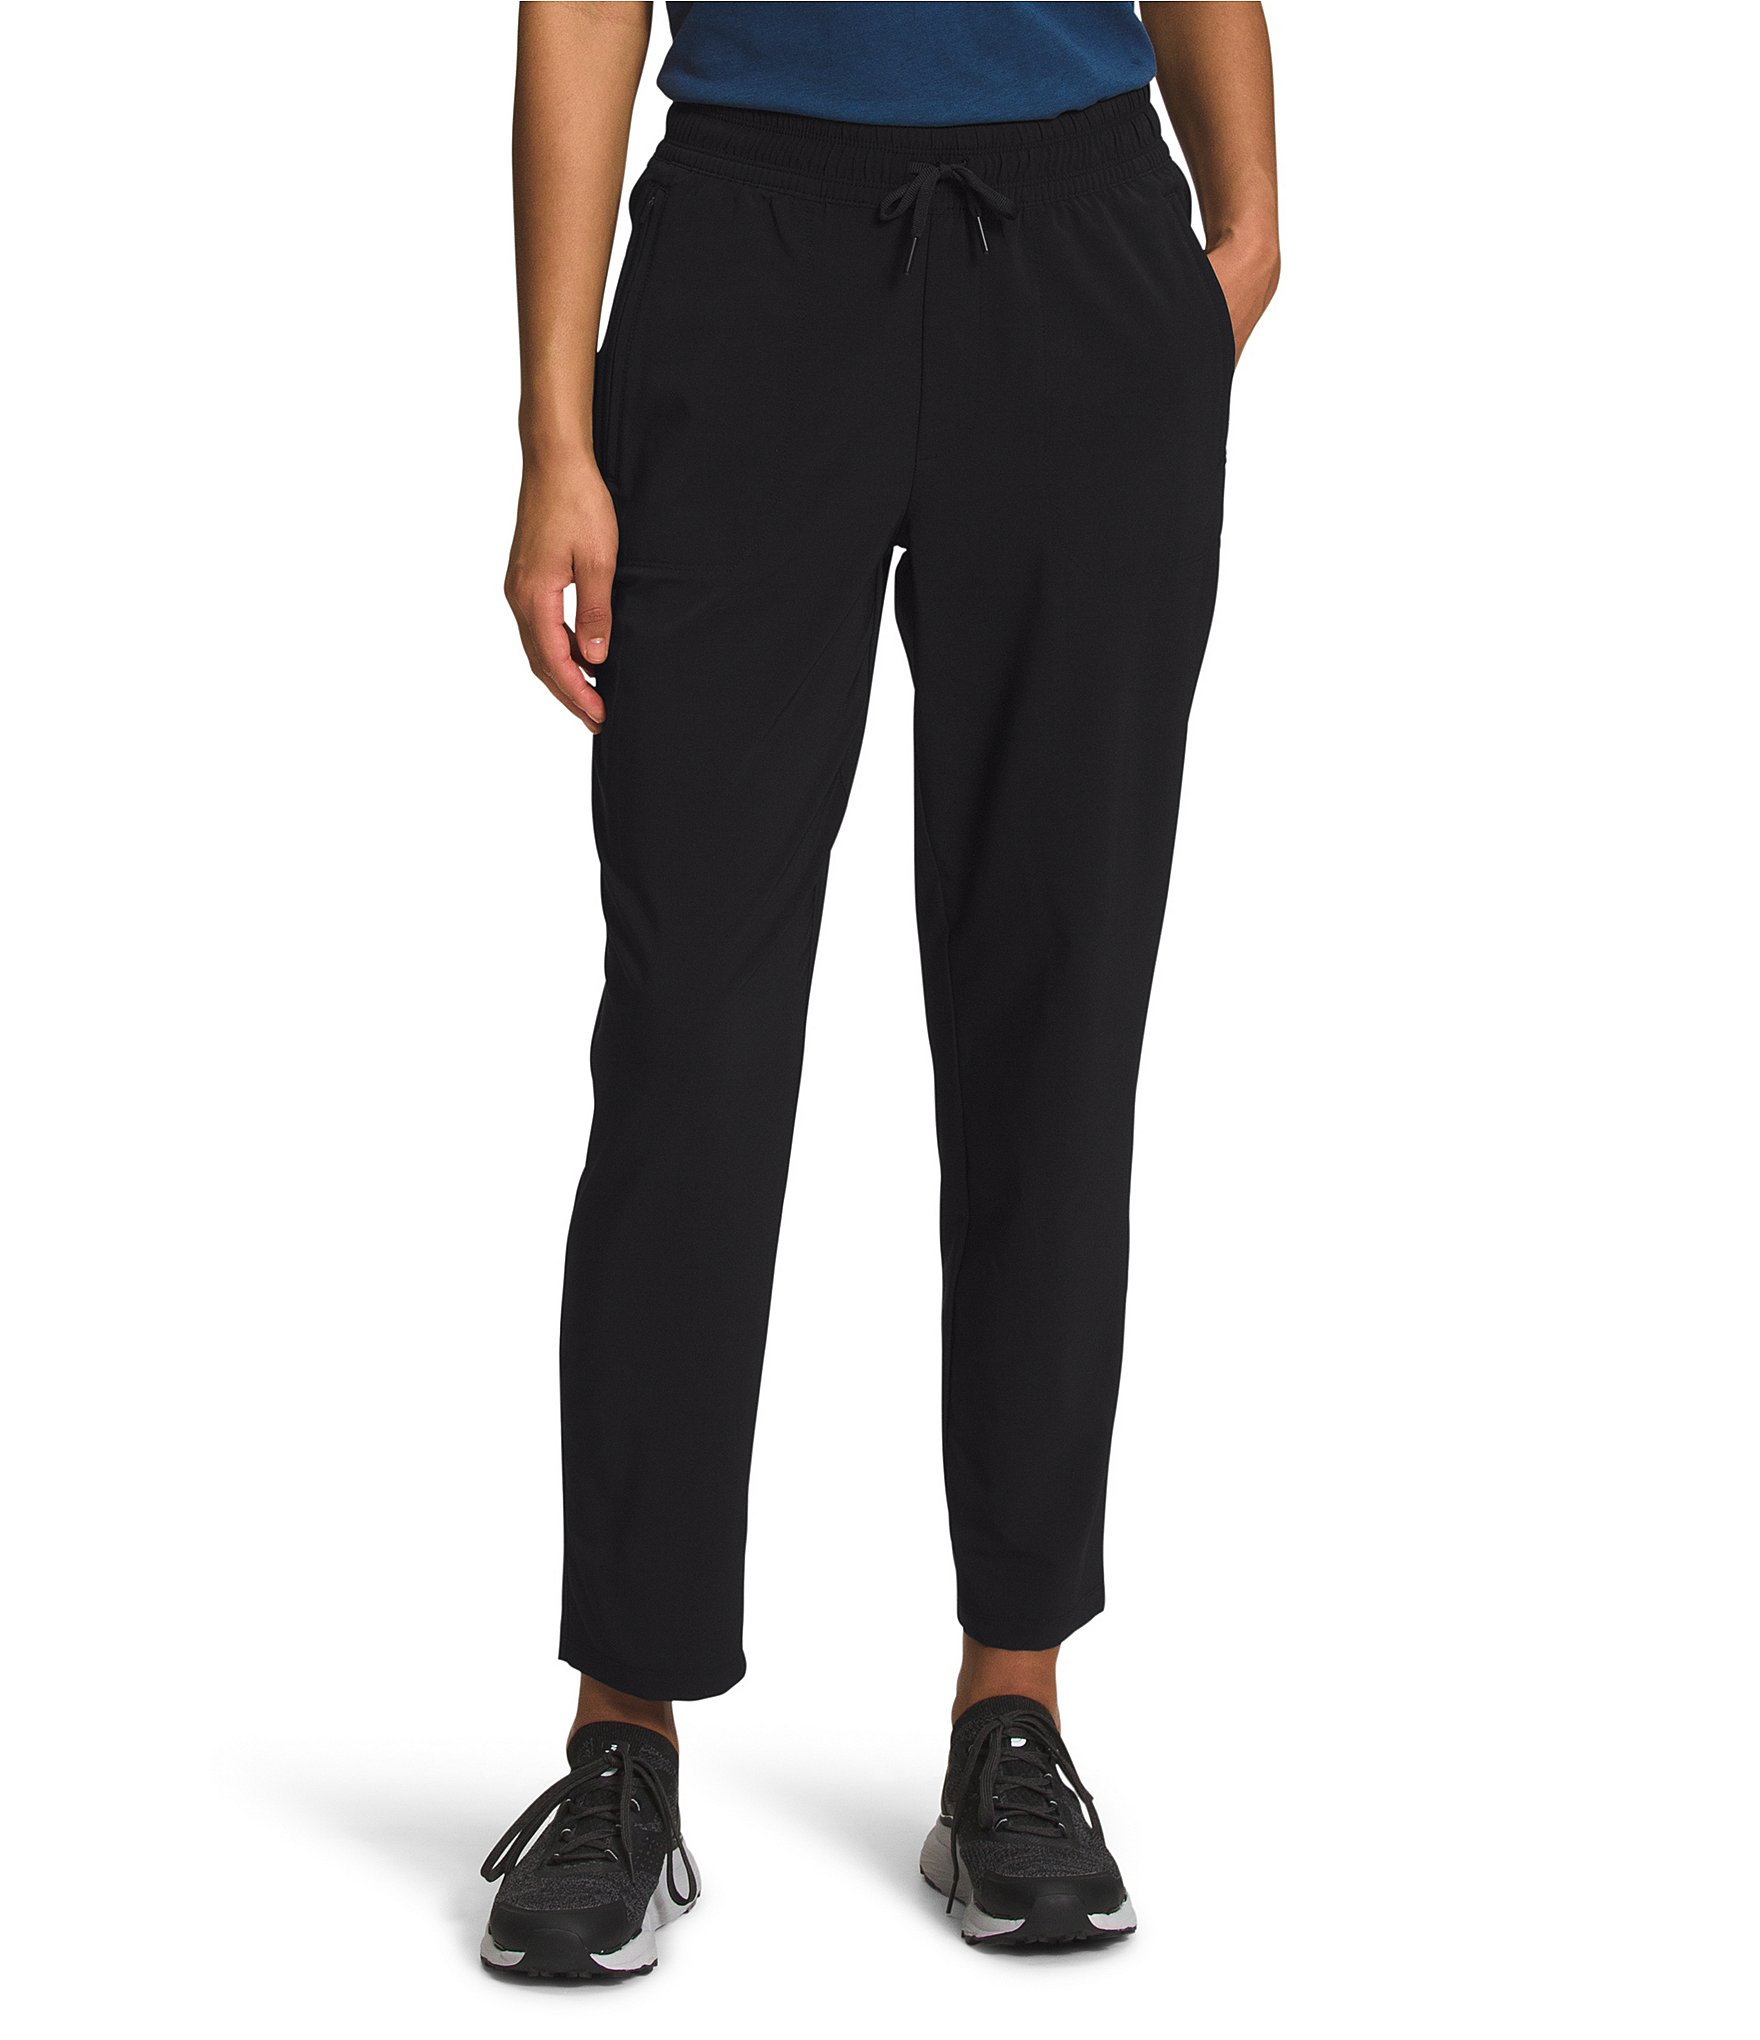 1X Women's Outdoor and Performance Pants & Leggings